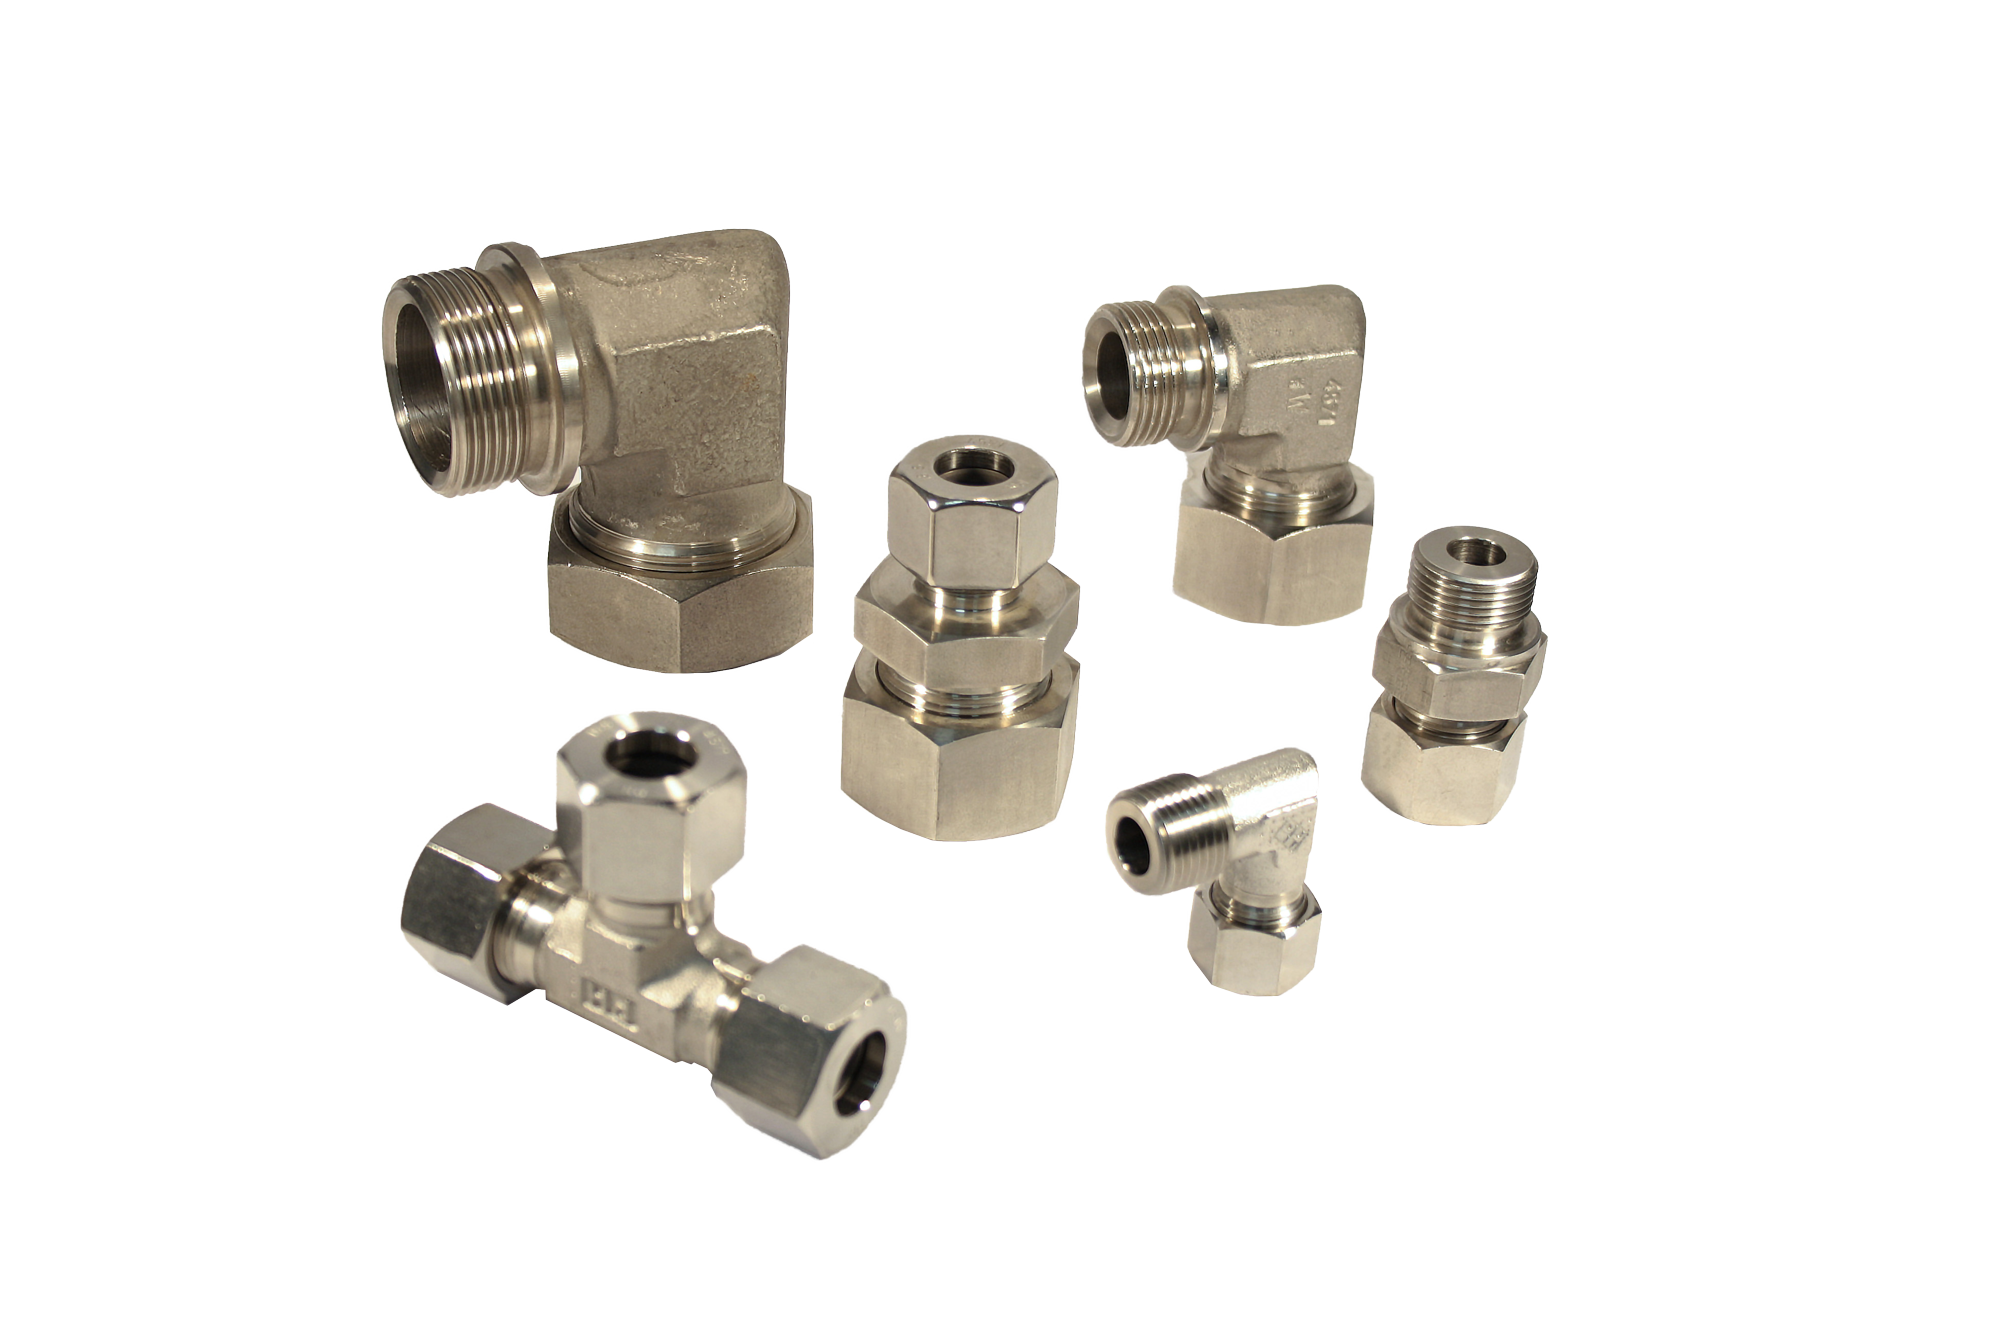 SINGLE RING COMPRESSION FITTINGS (DIN 2353)